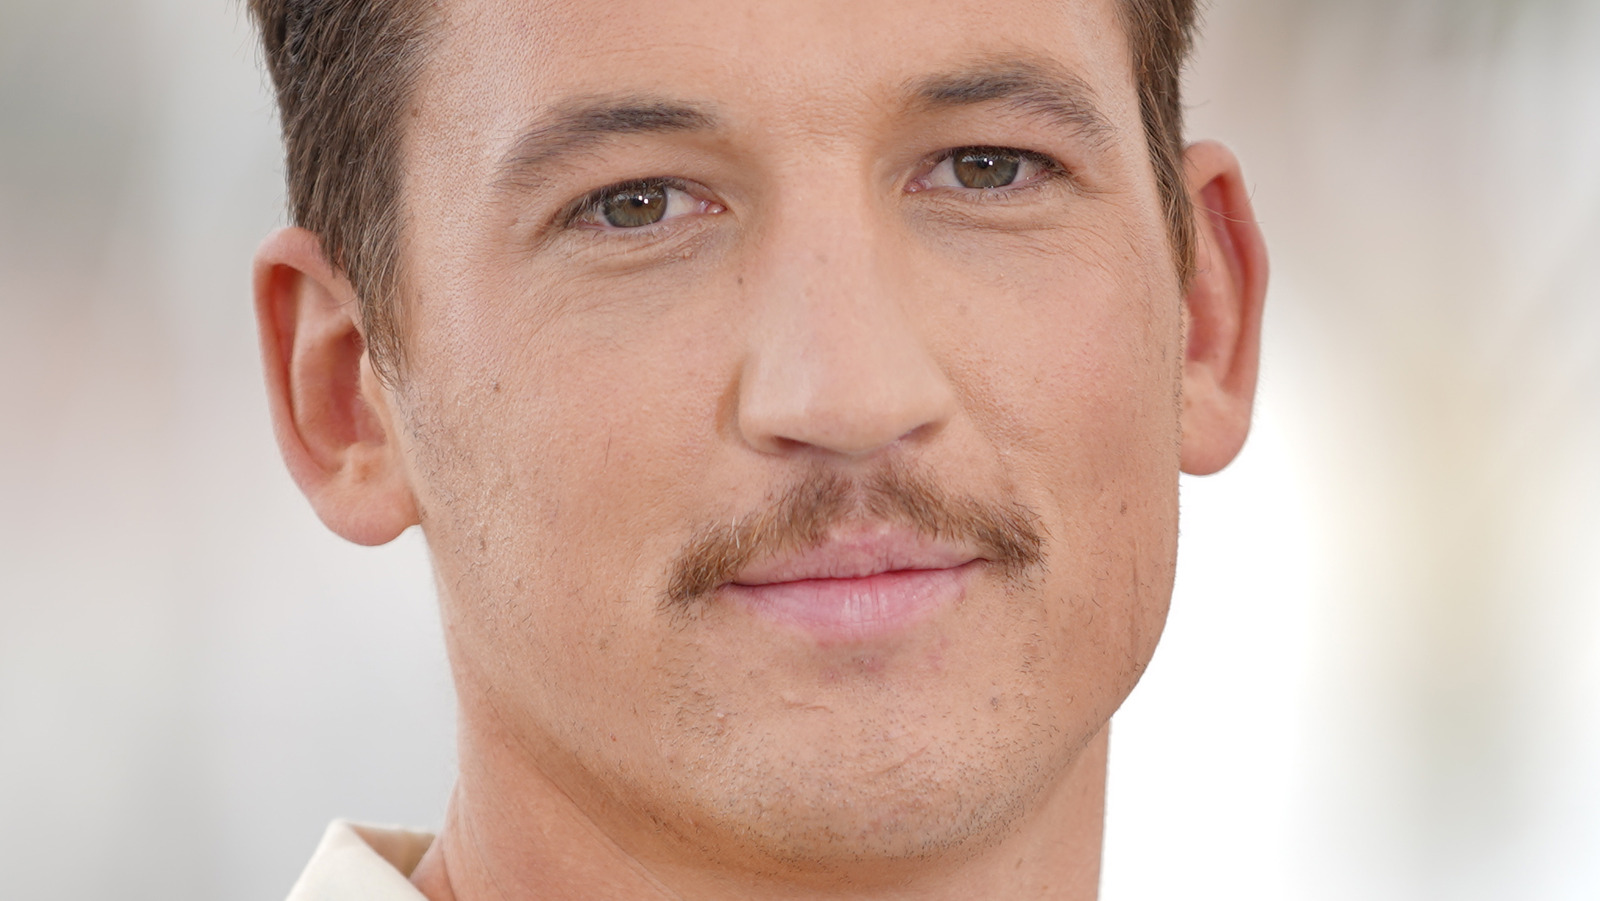 Miles Teller Admits He's Taken Viagra Before Out of Curiosity